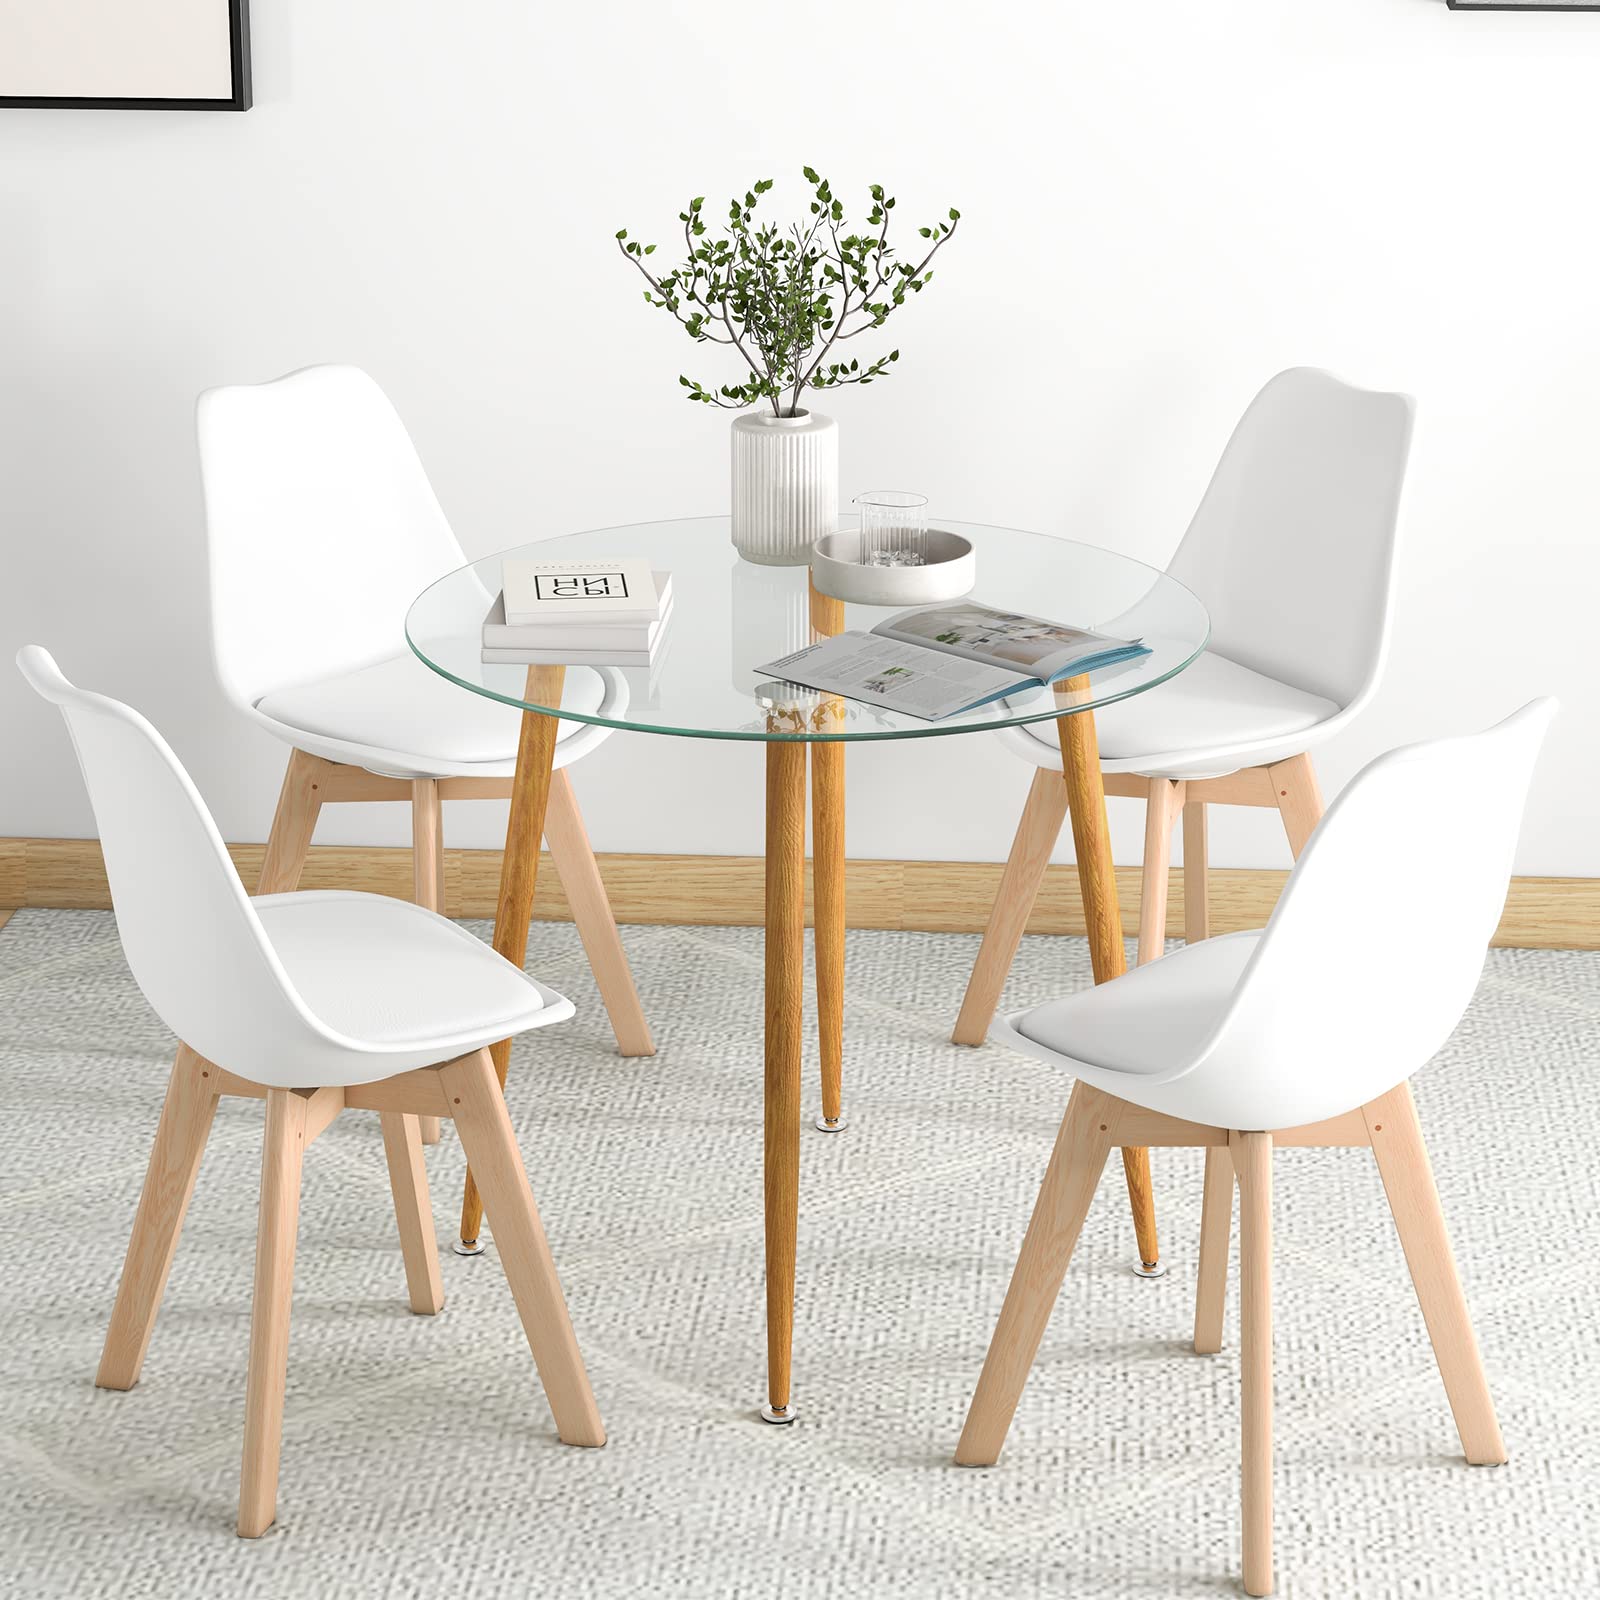 Giantex Dining Table Set for 4, Modern 5-Piece Dining Room Set w/ 1 Round Tempered Glass Table & 4 High Back Chairs